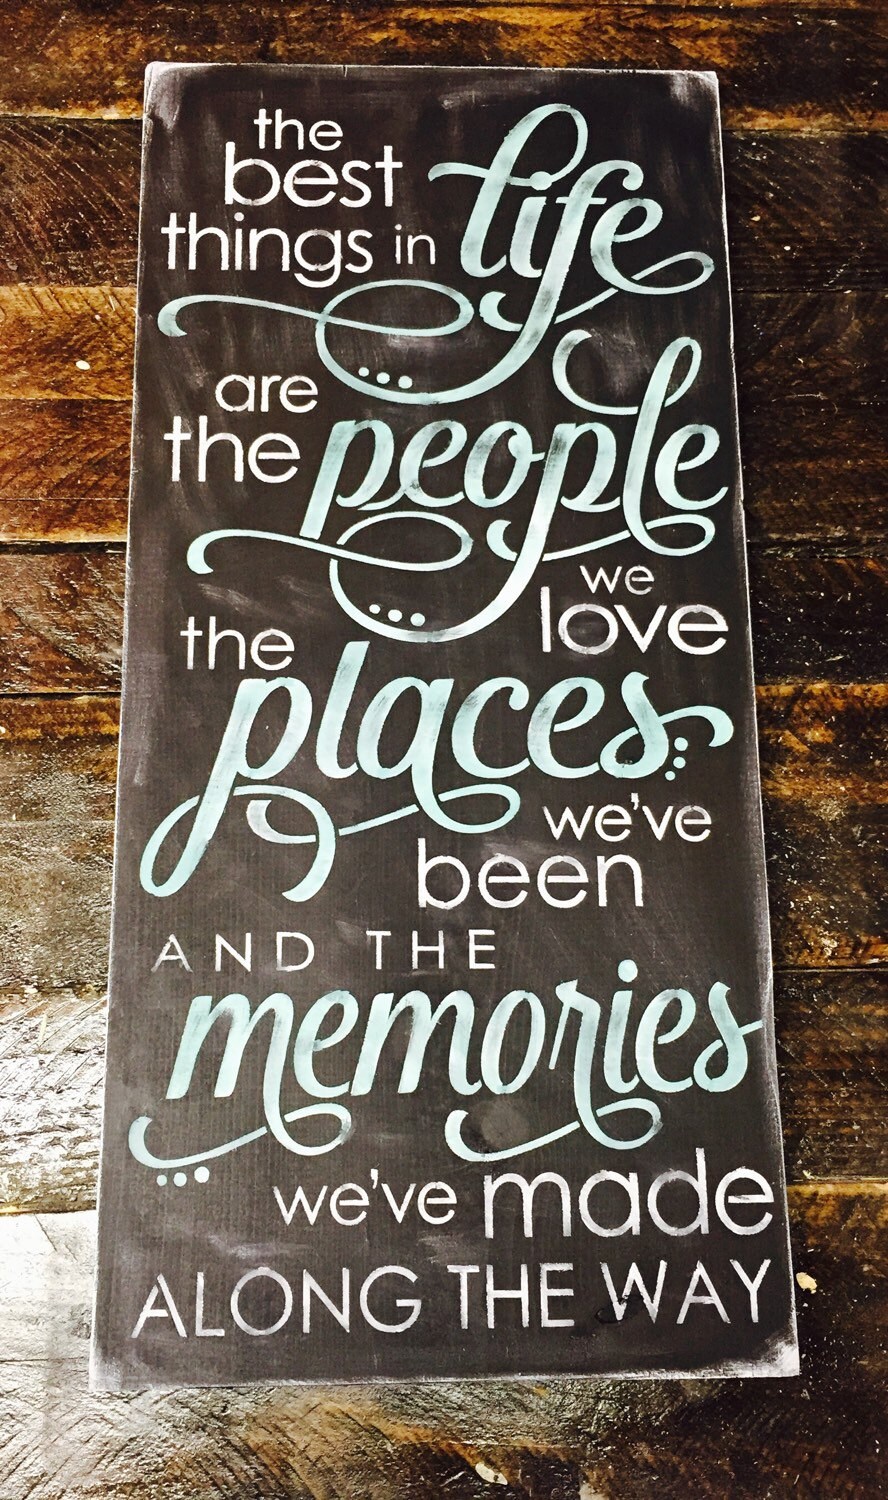 The best things in life are the people we love the places | Etsy